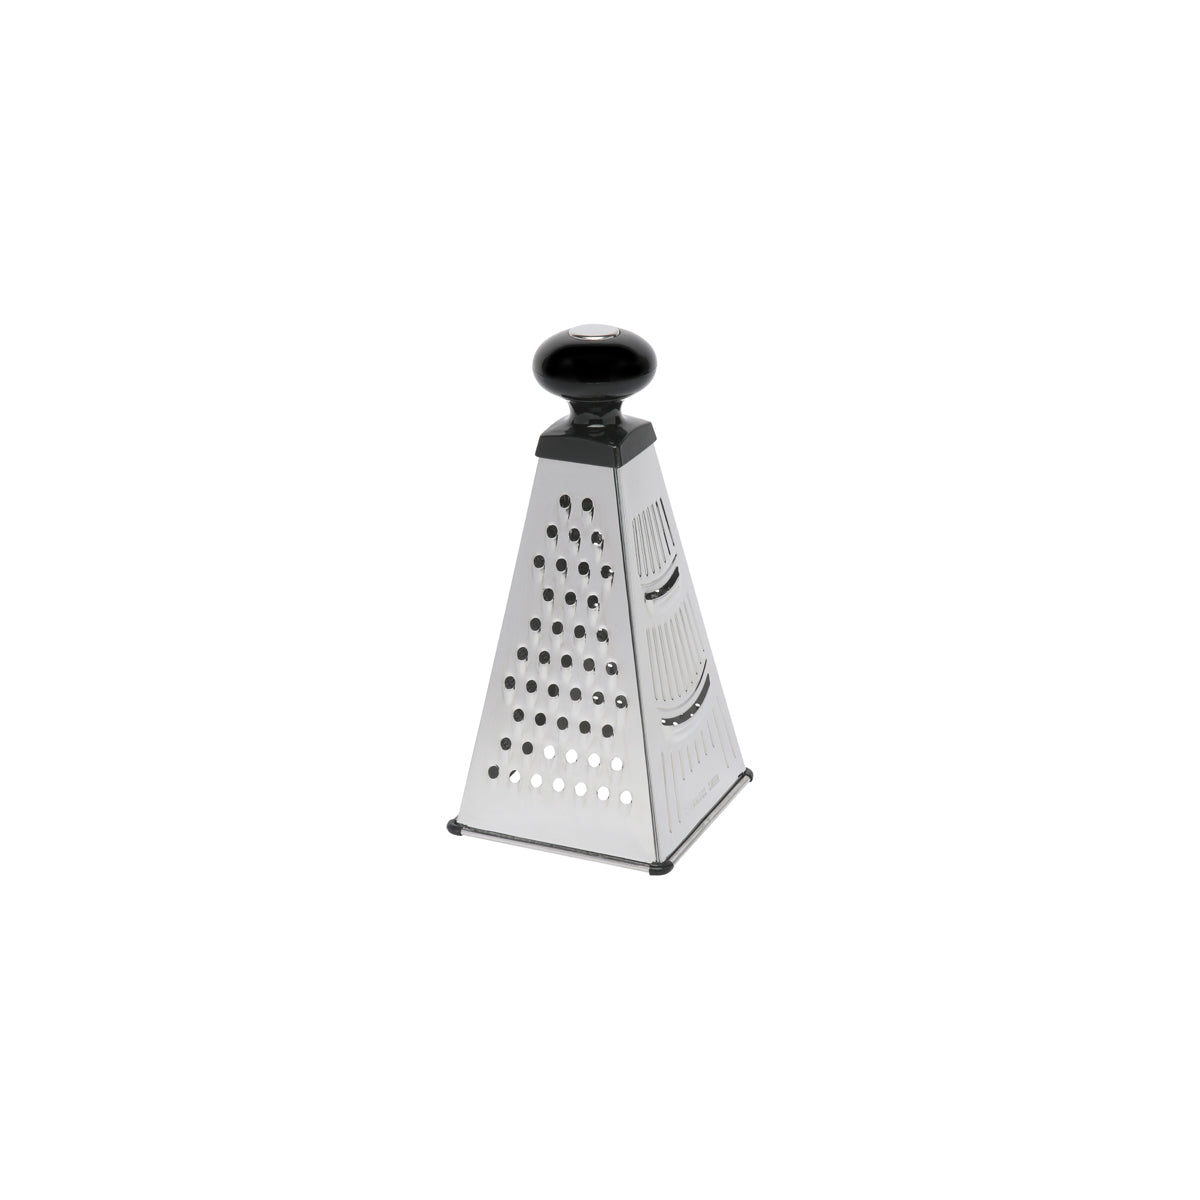 WLT43442 Wiltshire Pyramid Grater 4 Way Tomkin Australia Hospitality Supplies